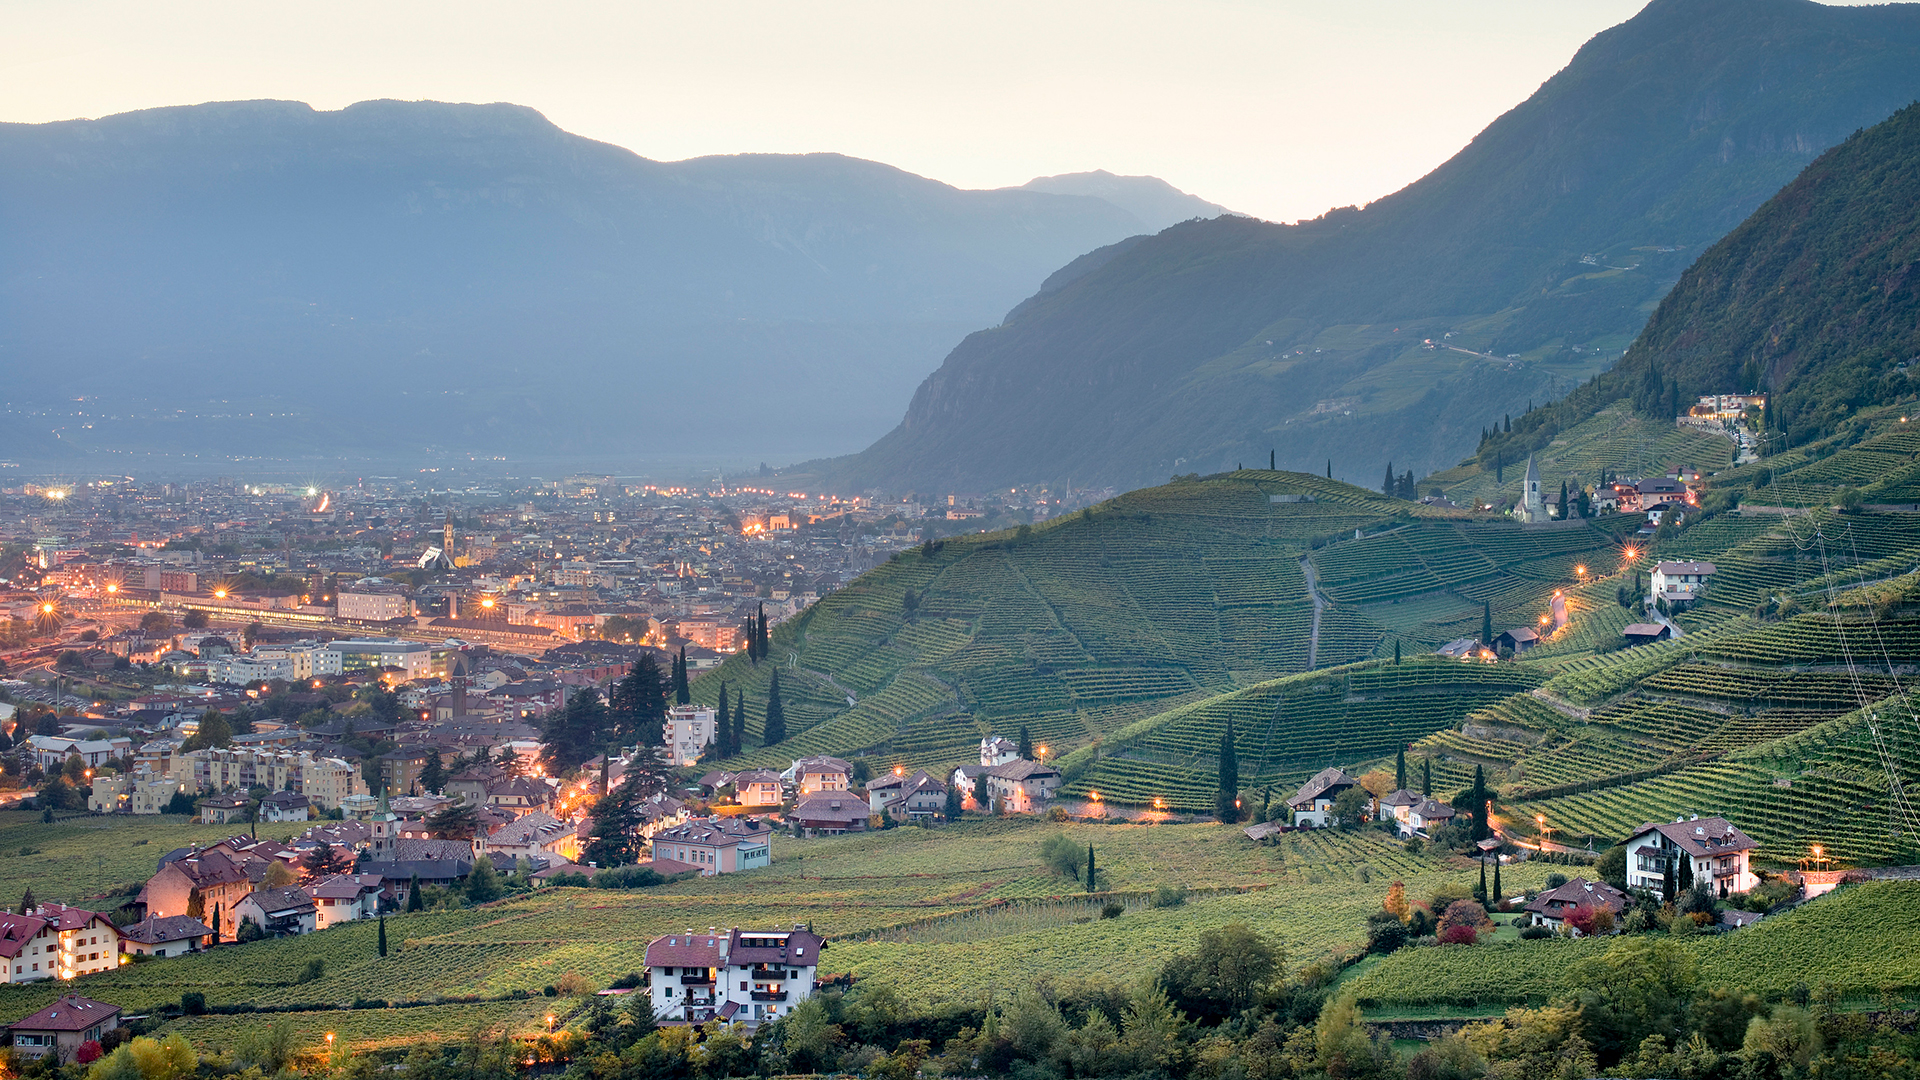 Evening view of the vineyards in Bolzano in the foreground and the illuminated city below the mountains in the background.